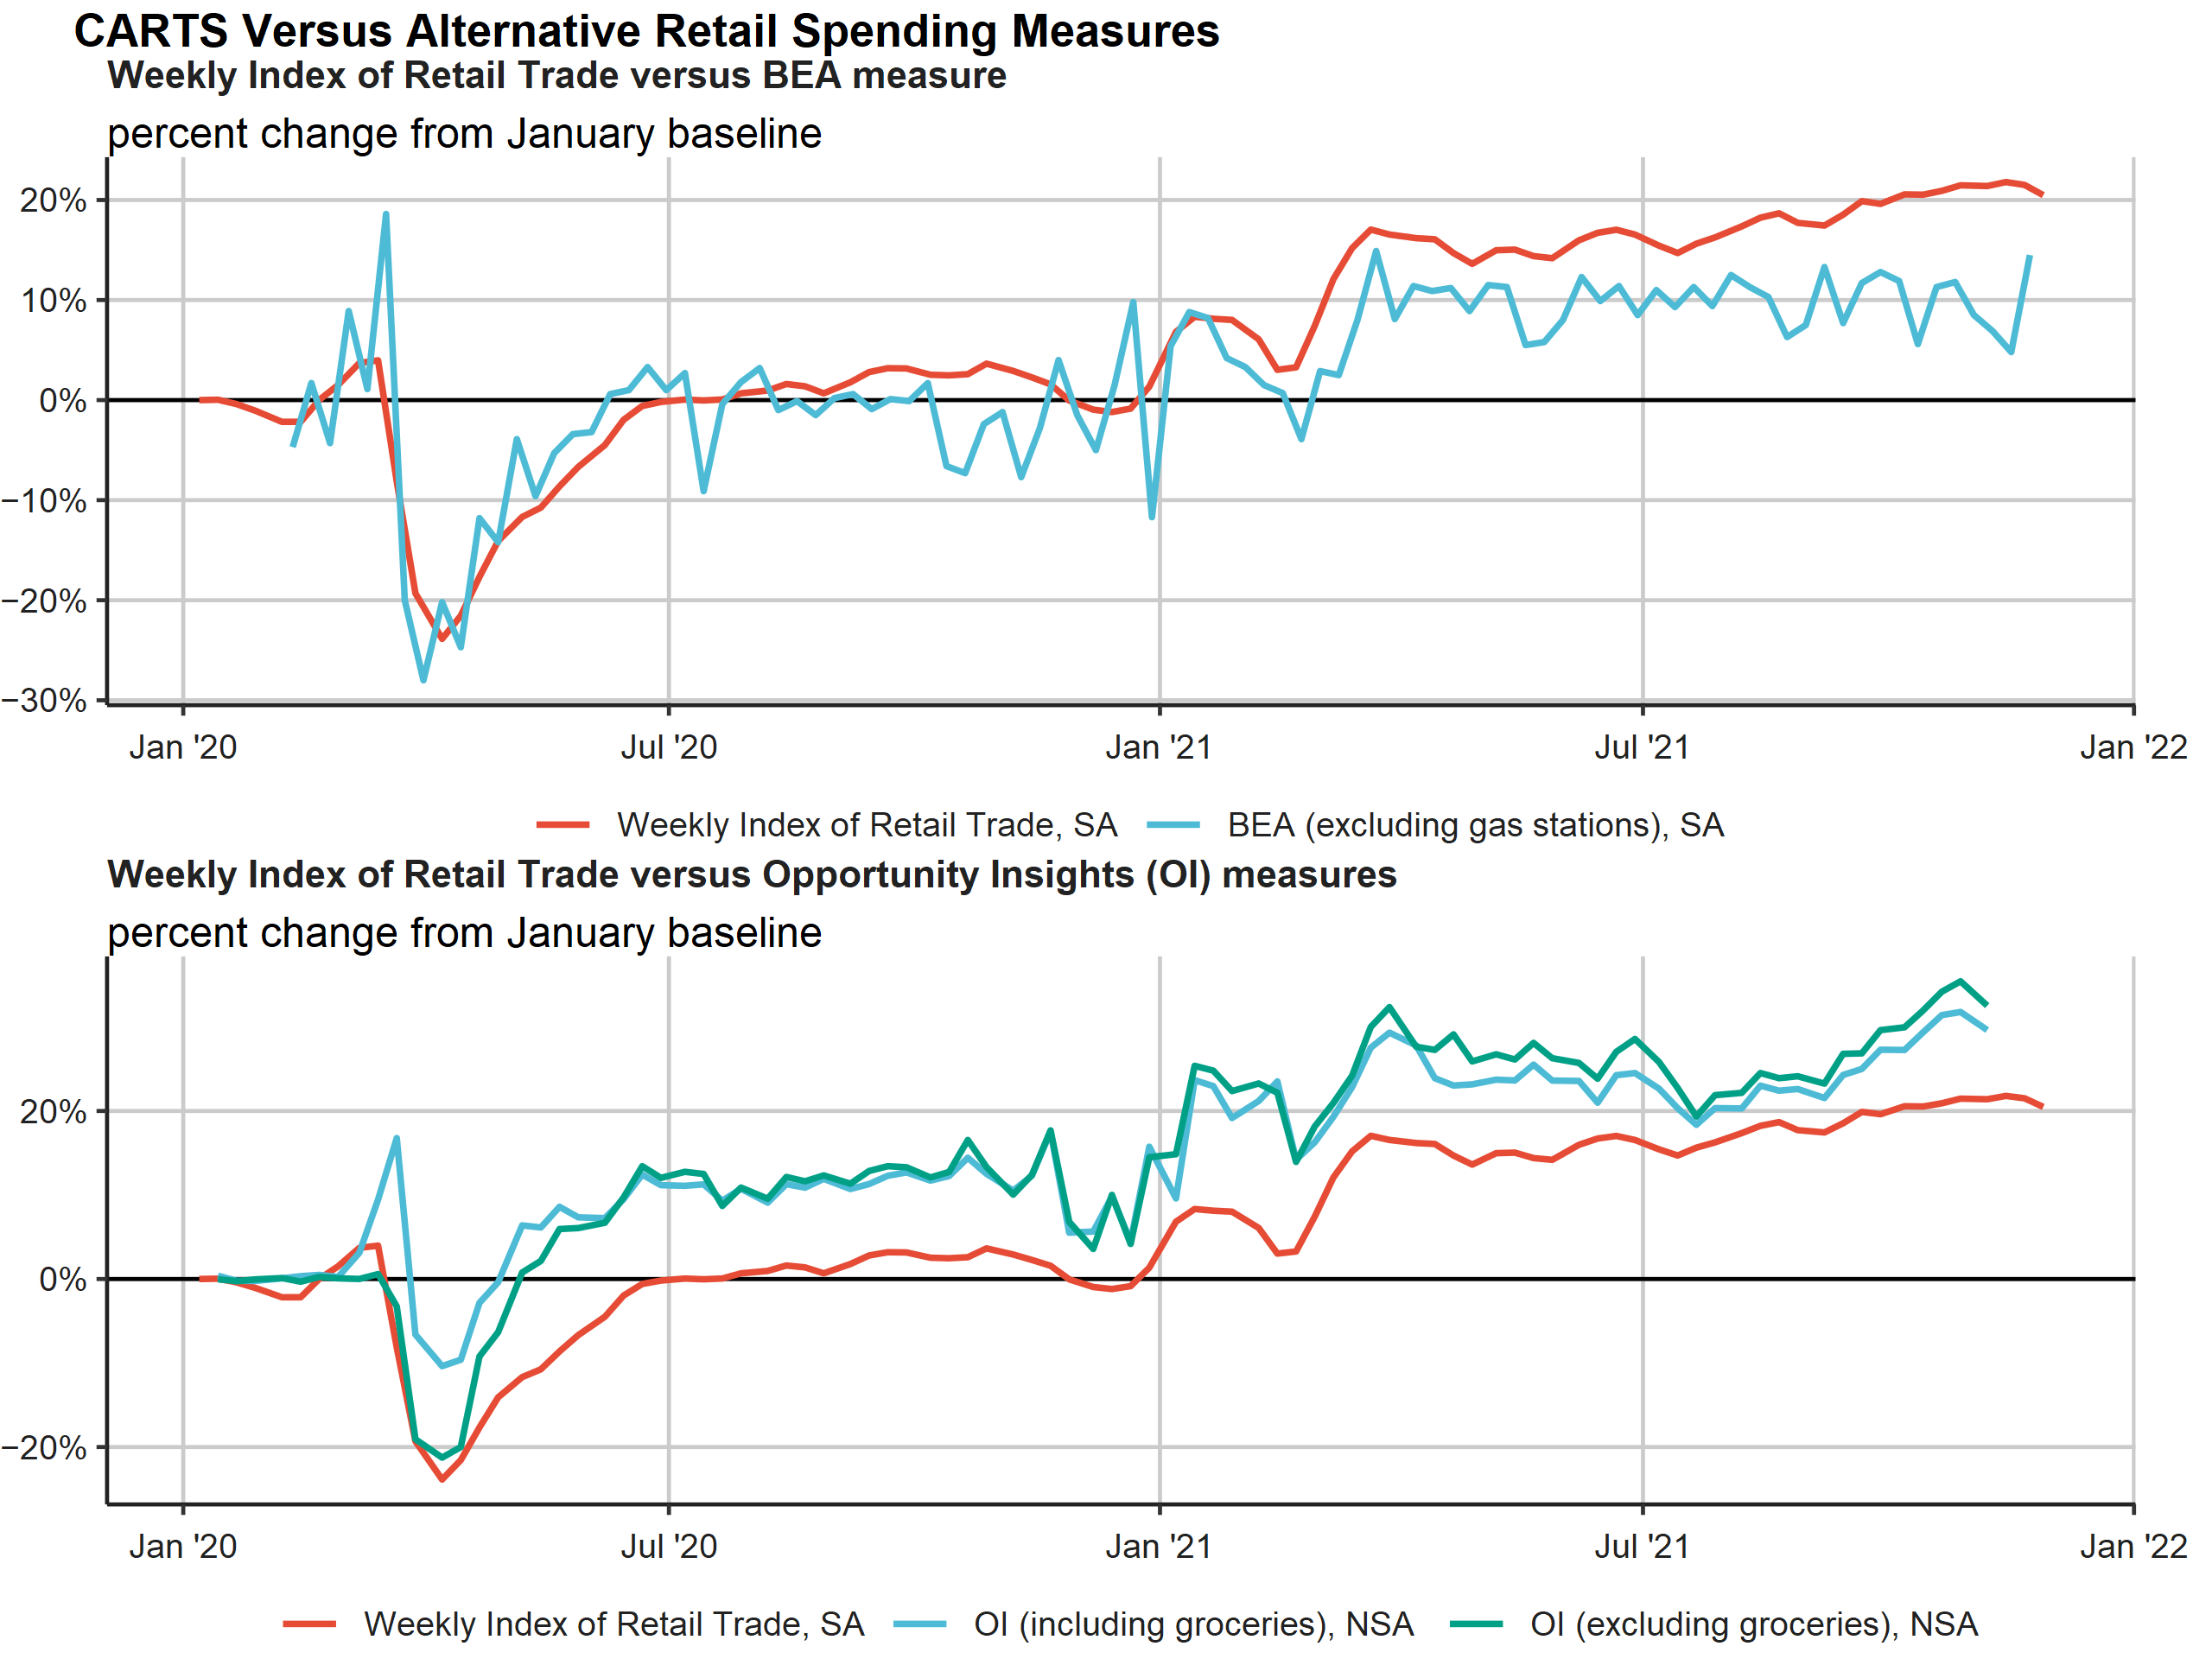 Figure 2 features two panels, each being a line chart. The top panel shows the CARTS and the BEA’s index of retail spending from January 2020 through the latest month of data. The CARTS and BEA index show no clear trend in retail spending until March 2020, when retail spending in both indexes drop by around 20 percent before recovering to typical levels by July 2020. Both measures of retail spending then remain at typical levels until January 2021, when retail spending increases to between 5 and 10 percent above trend before gradually declining back to typical levels in March 2021. The bottom panel shows the same patterns over the same time period, but compares CARTS with two measures of retail spending from the Opportunity Insights research group—one index includes grocery spending and the other excludes grocery spending. The Opportunity Insights index that includes grocery spending shows a shallower 10 percent decline in retail spending in March 2020 before spending recovers to 10 percent above typical levels by July 2020. The Opportunity Insights index that excludes grocery spending shows a 20 percent decline in retail spending in March 2020 and then recovers to 10 percent above typical levels by July 2020. As in the top panel, CARTS falls by 20 percent in March 2020 before recovering to typical levels by July 2020.